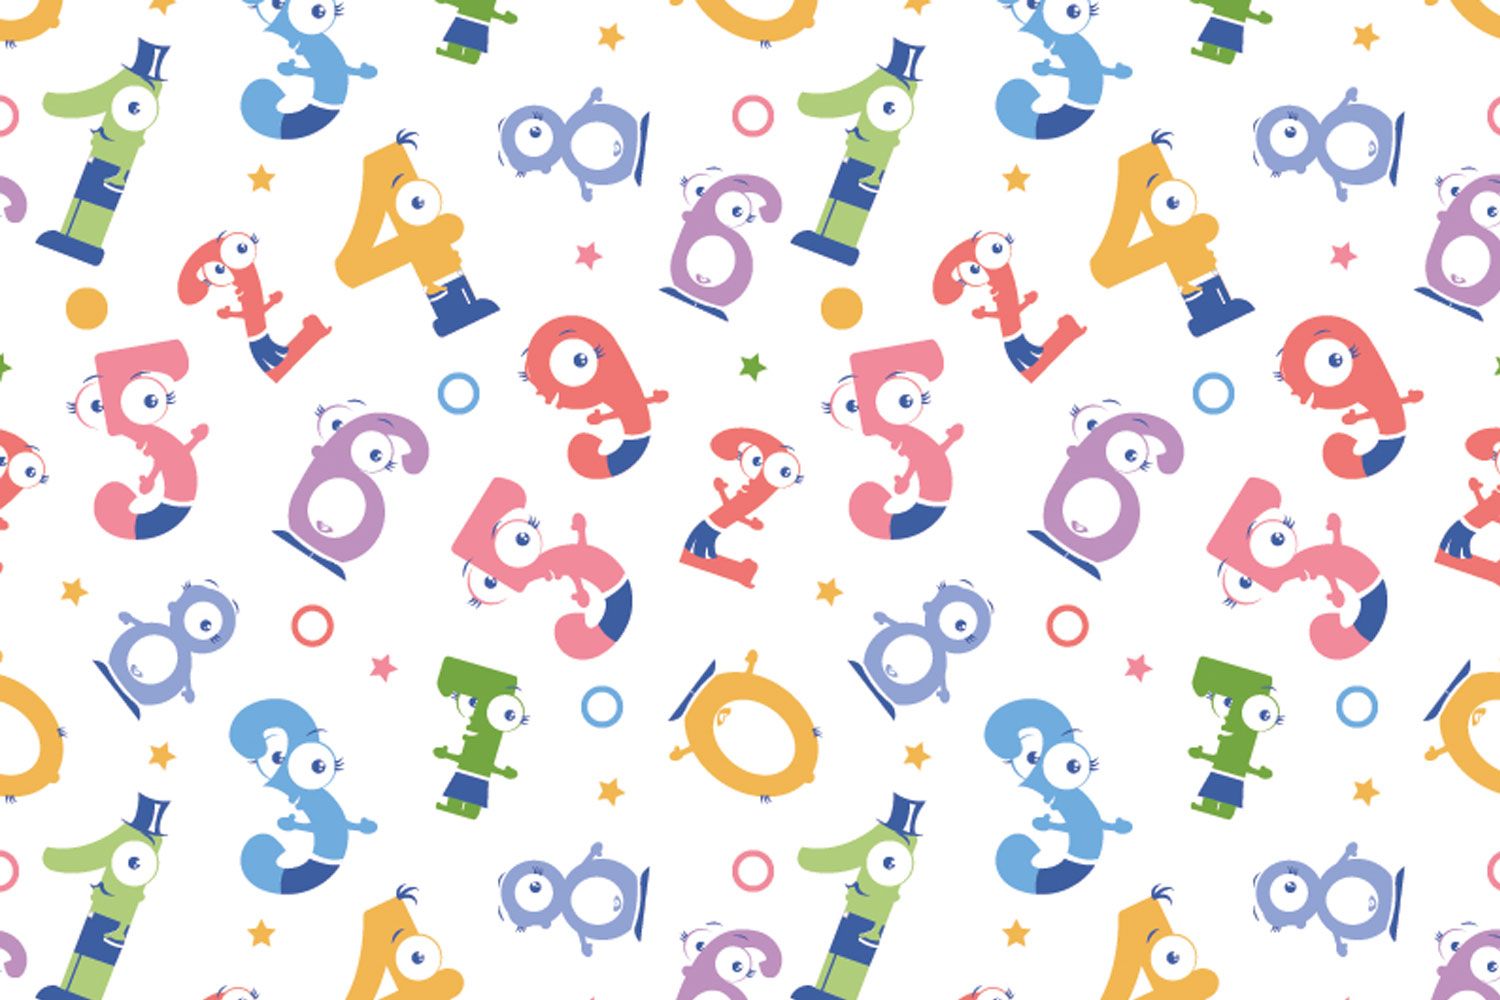 Numbers seamless pattern wallpaper for kids bedrooms. Cloud stickers, Pattern wallpaper, Kids wallpaper